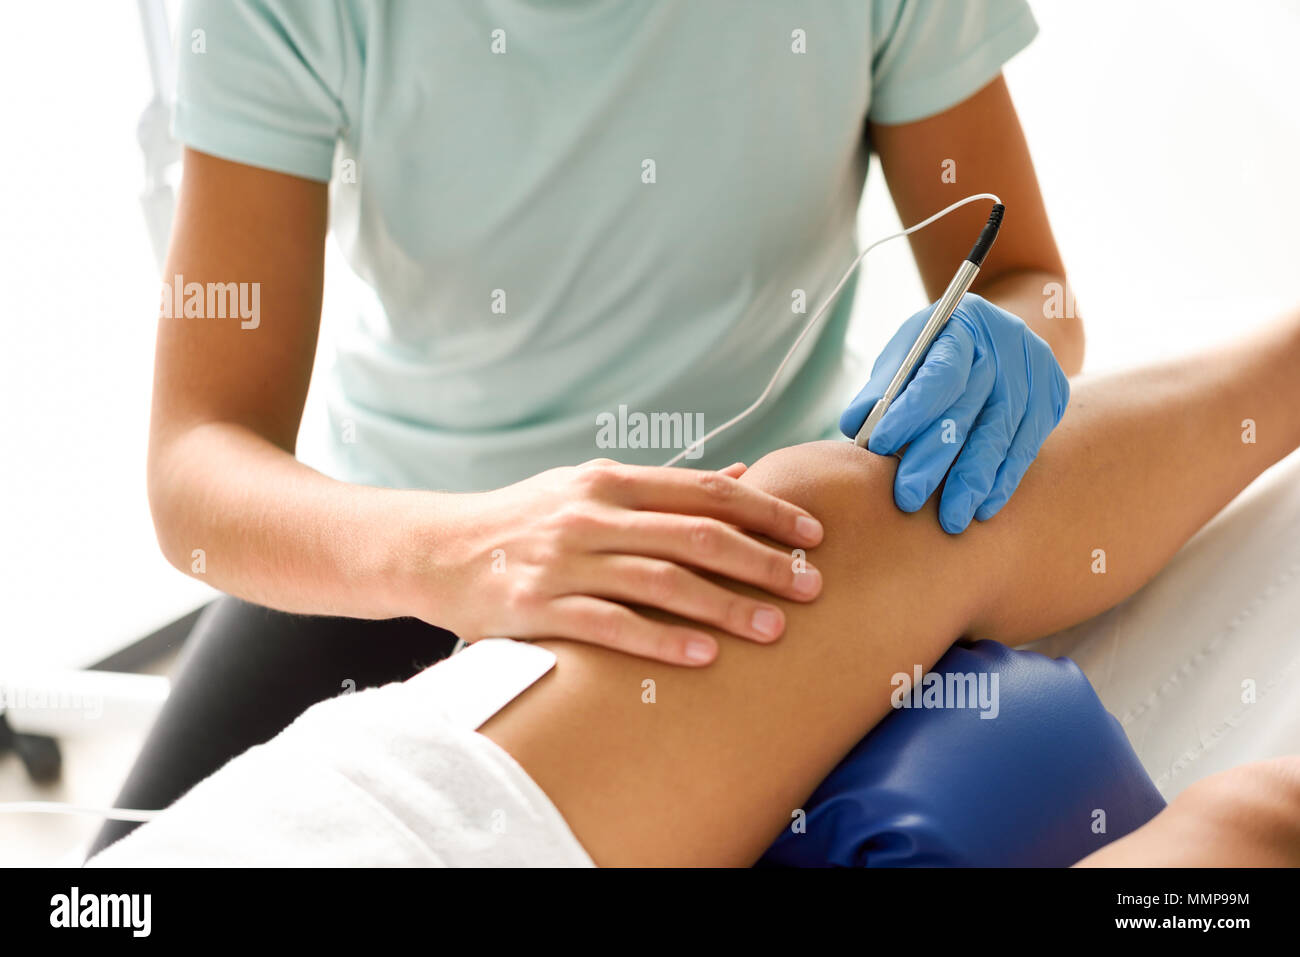 Electroacupuncture dry with needle connecting machine used by acupunturist on female patient for acupuncture guided by EPI Intratissue Percutaneous El Stock Photo